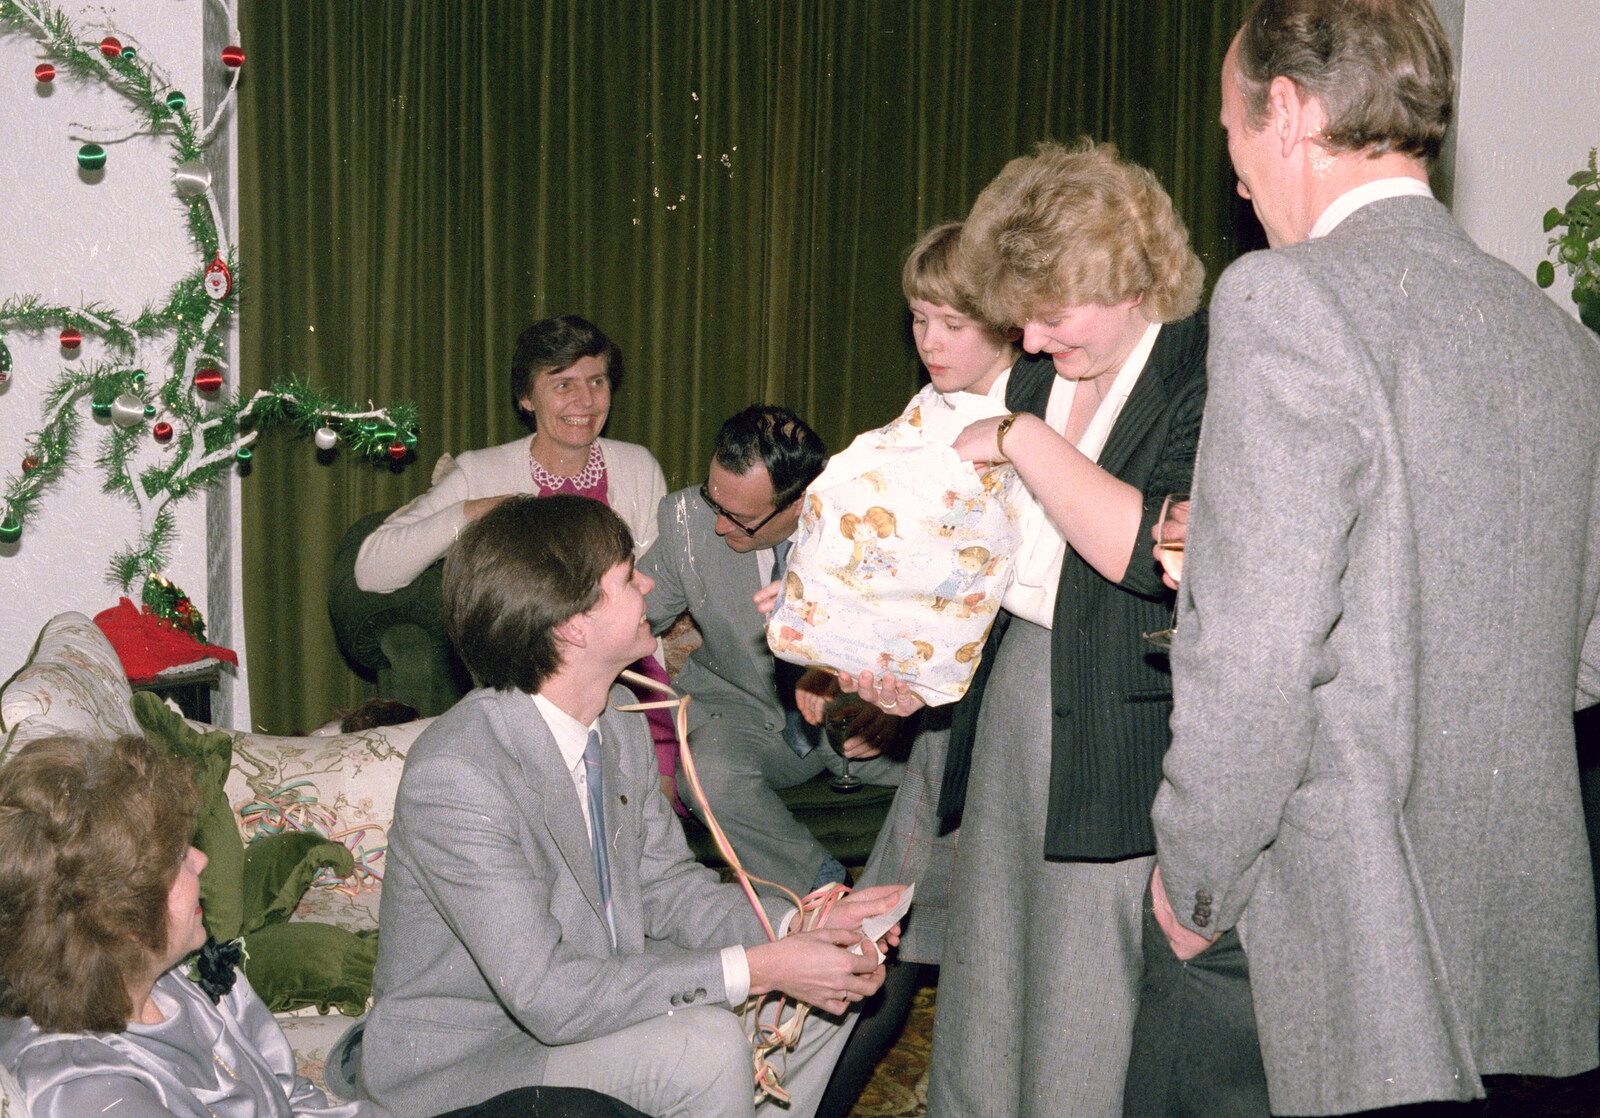 Anna opens a present, in a sea of grey suits from New Year's Eve at Anna's, Walkford, Dorset - 31st December 1985